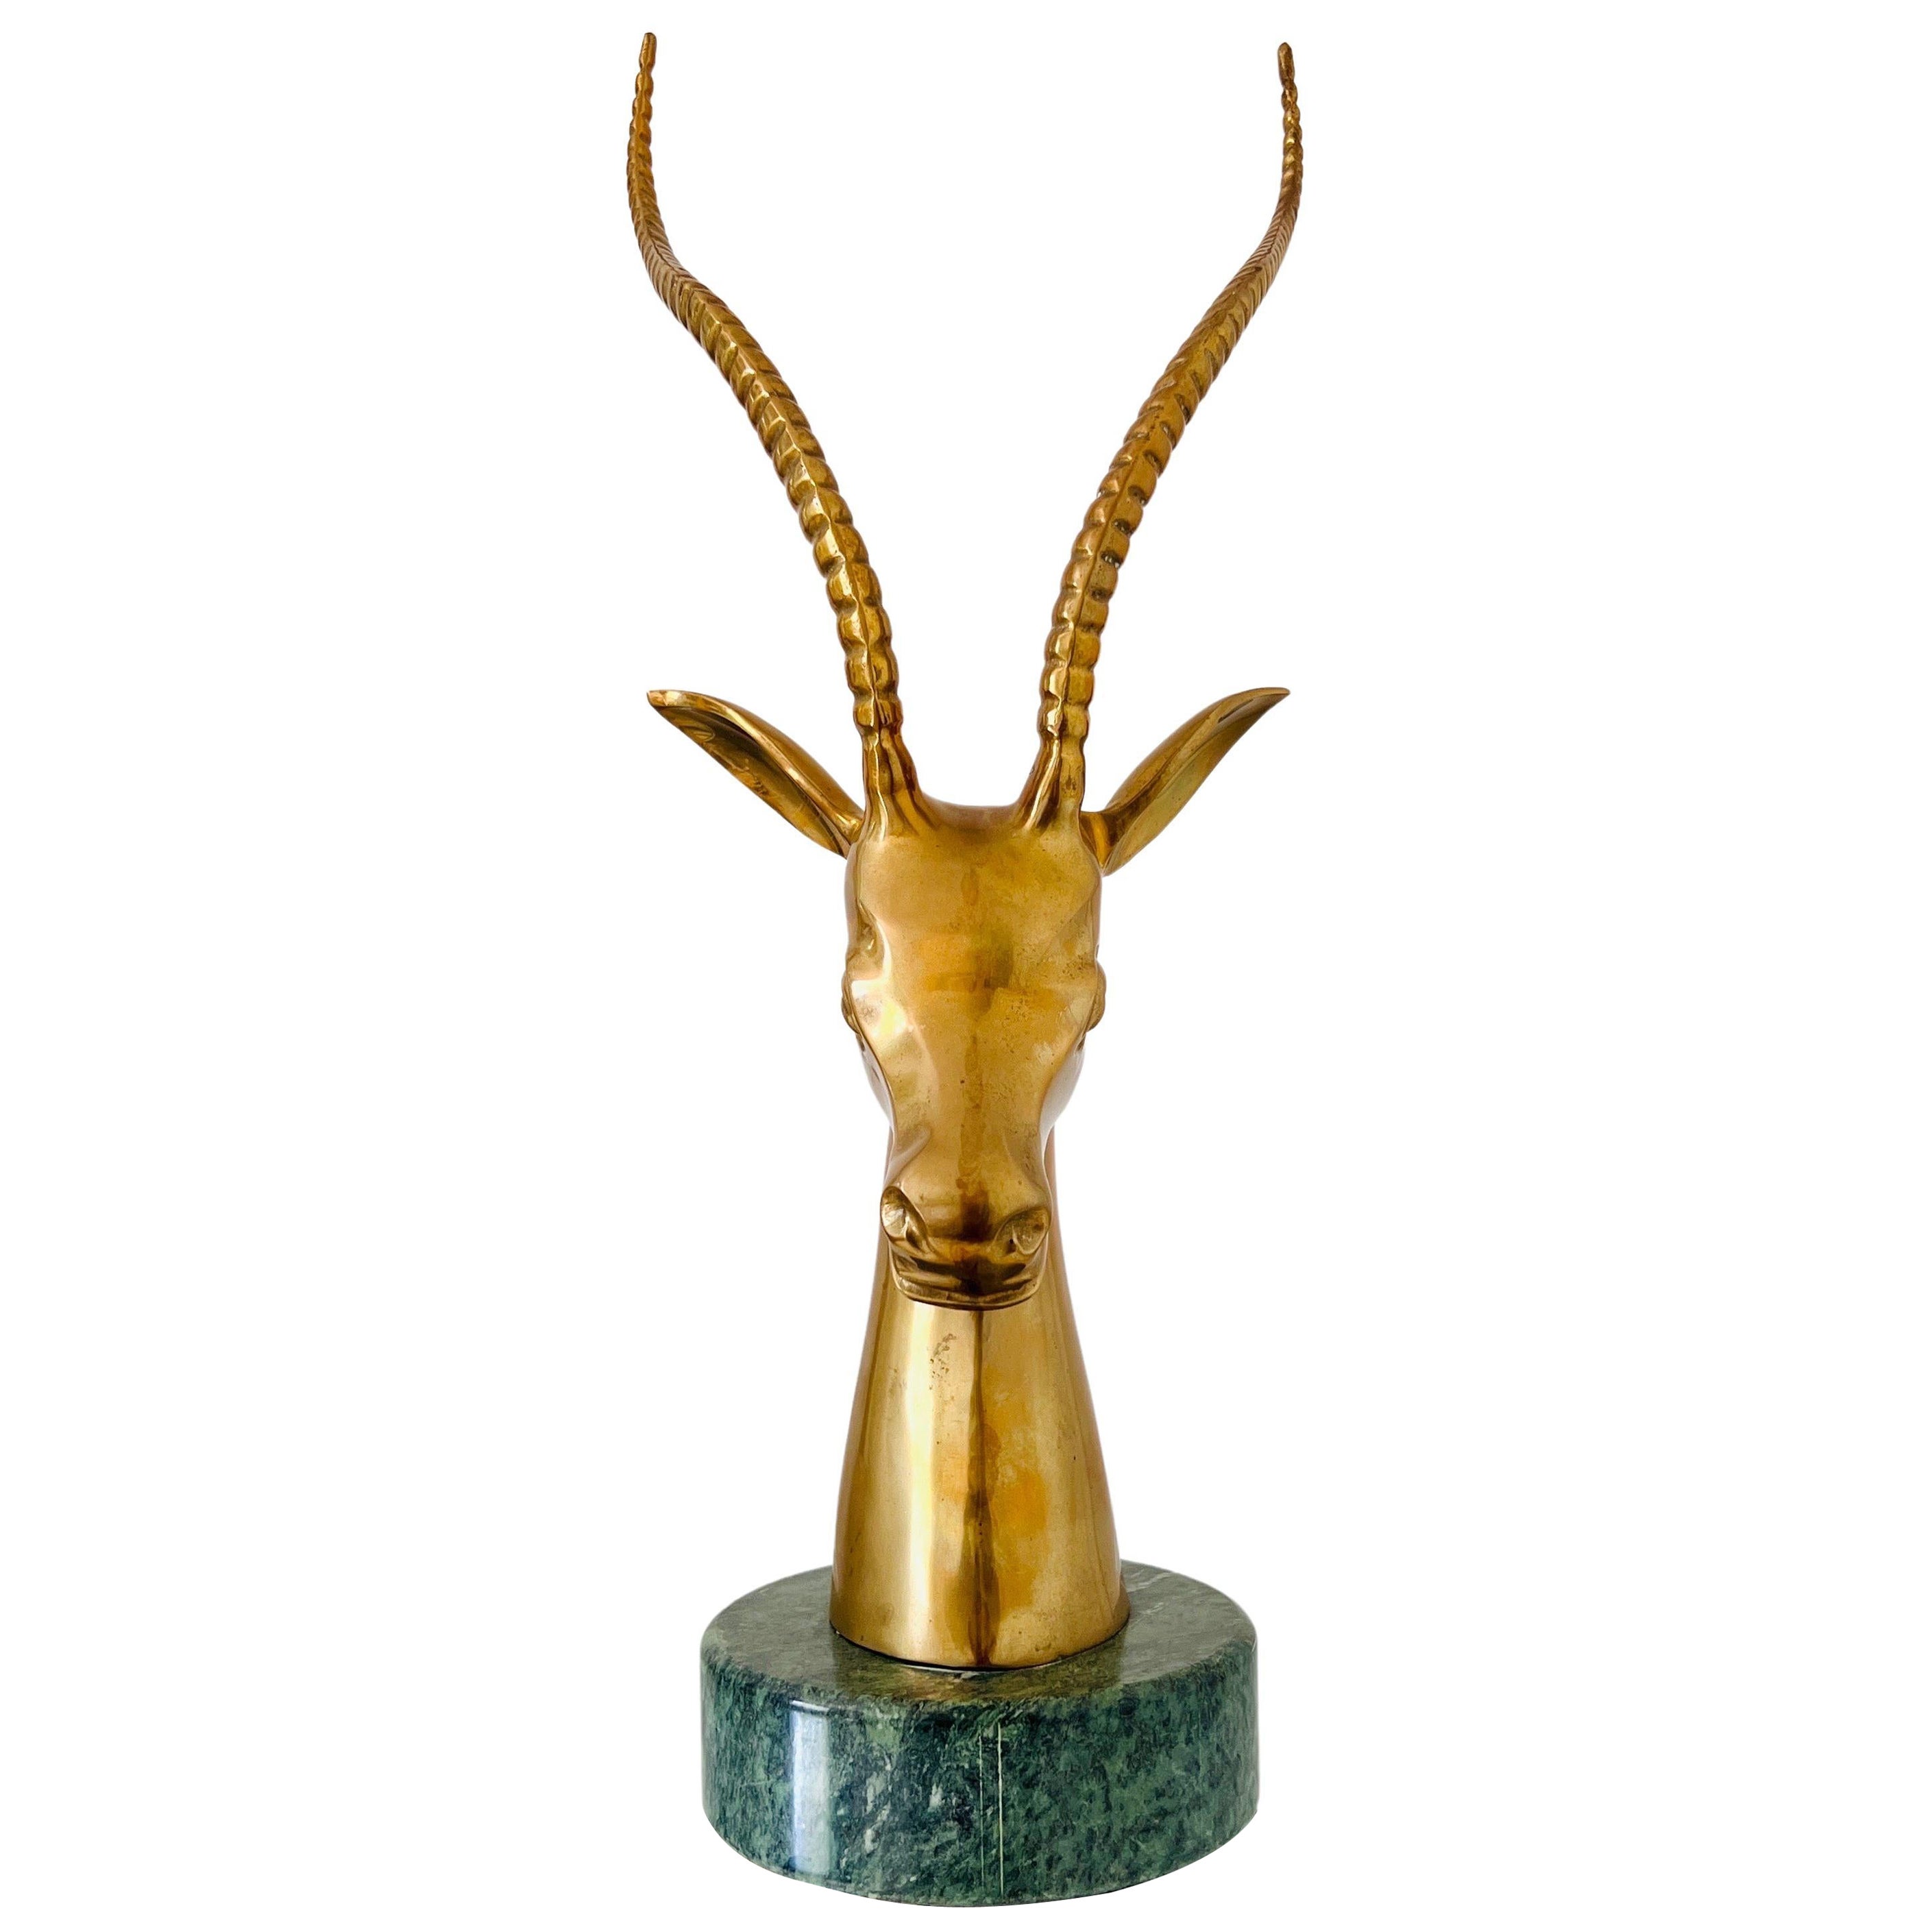 Brass Ibex Sculpture with Exotic Verde Guatemala Marble Base, circa 1970s For Sale